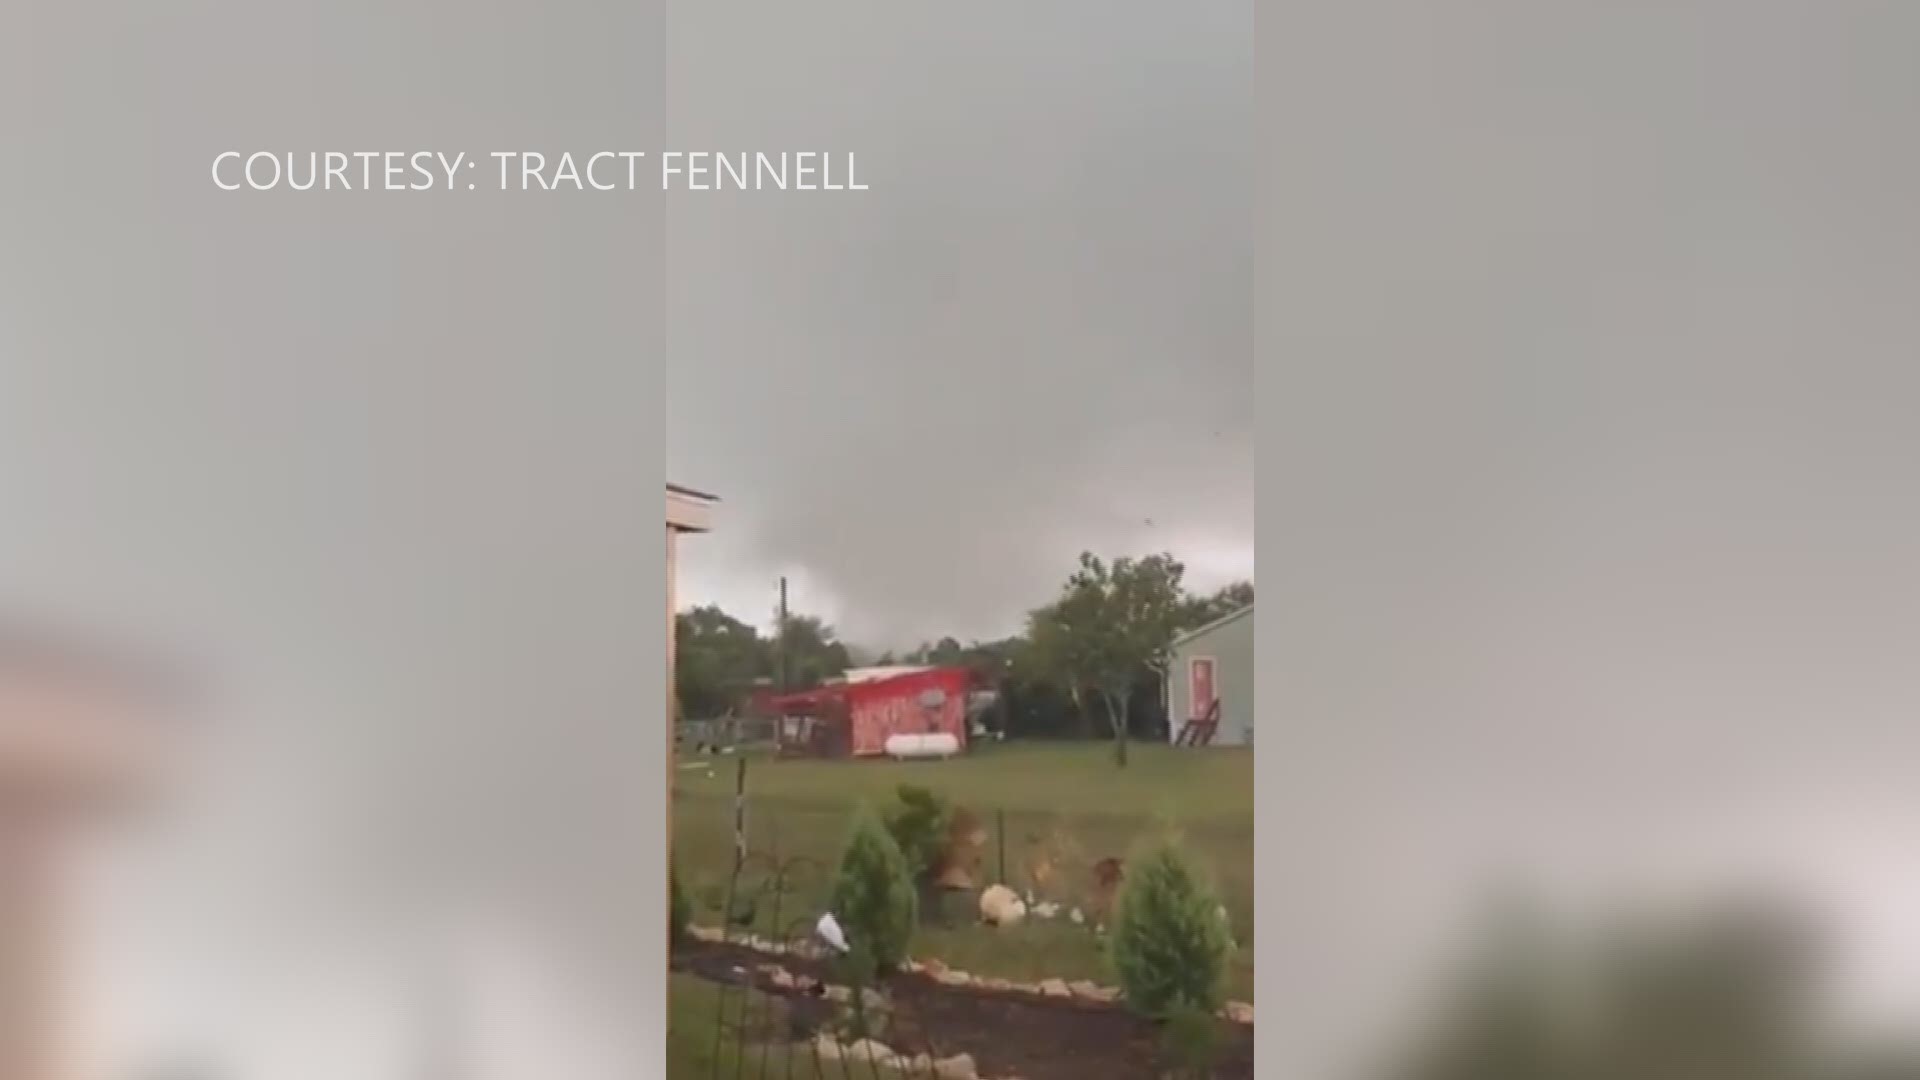 This video is courtesy of Tract Fennell, who took footage of this tornado near Smithville.